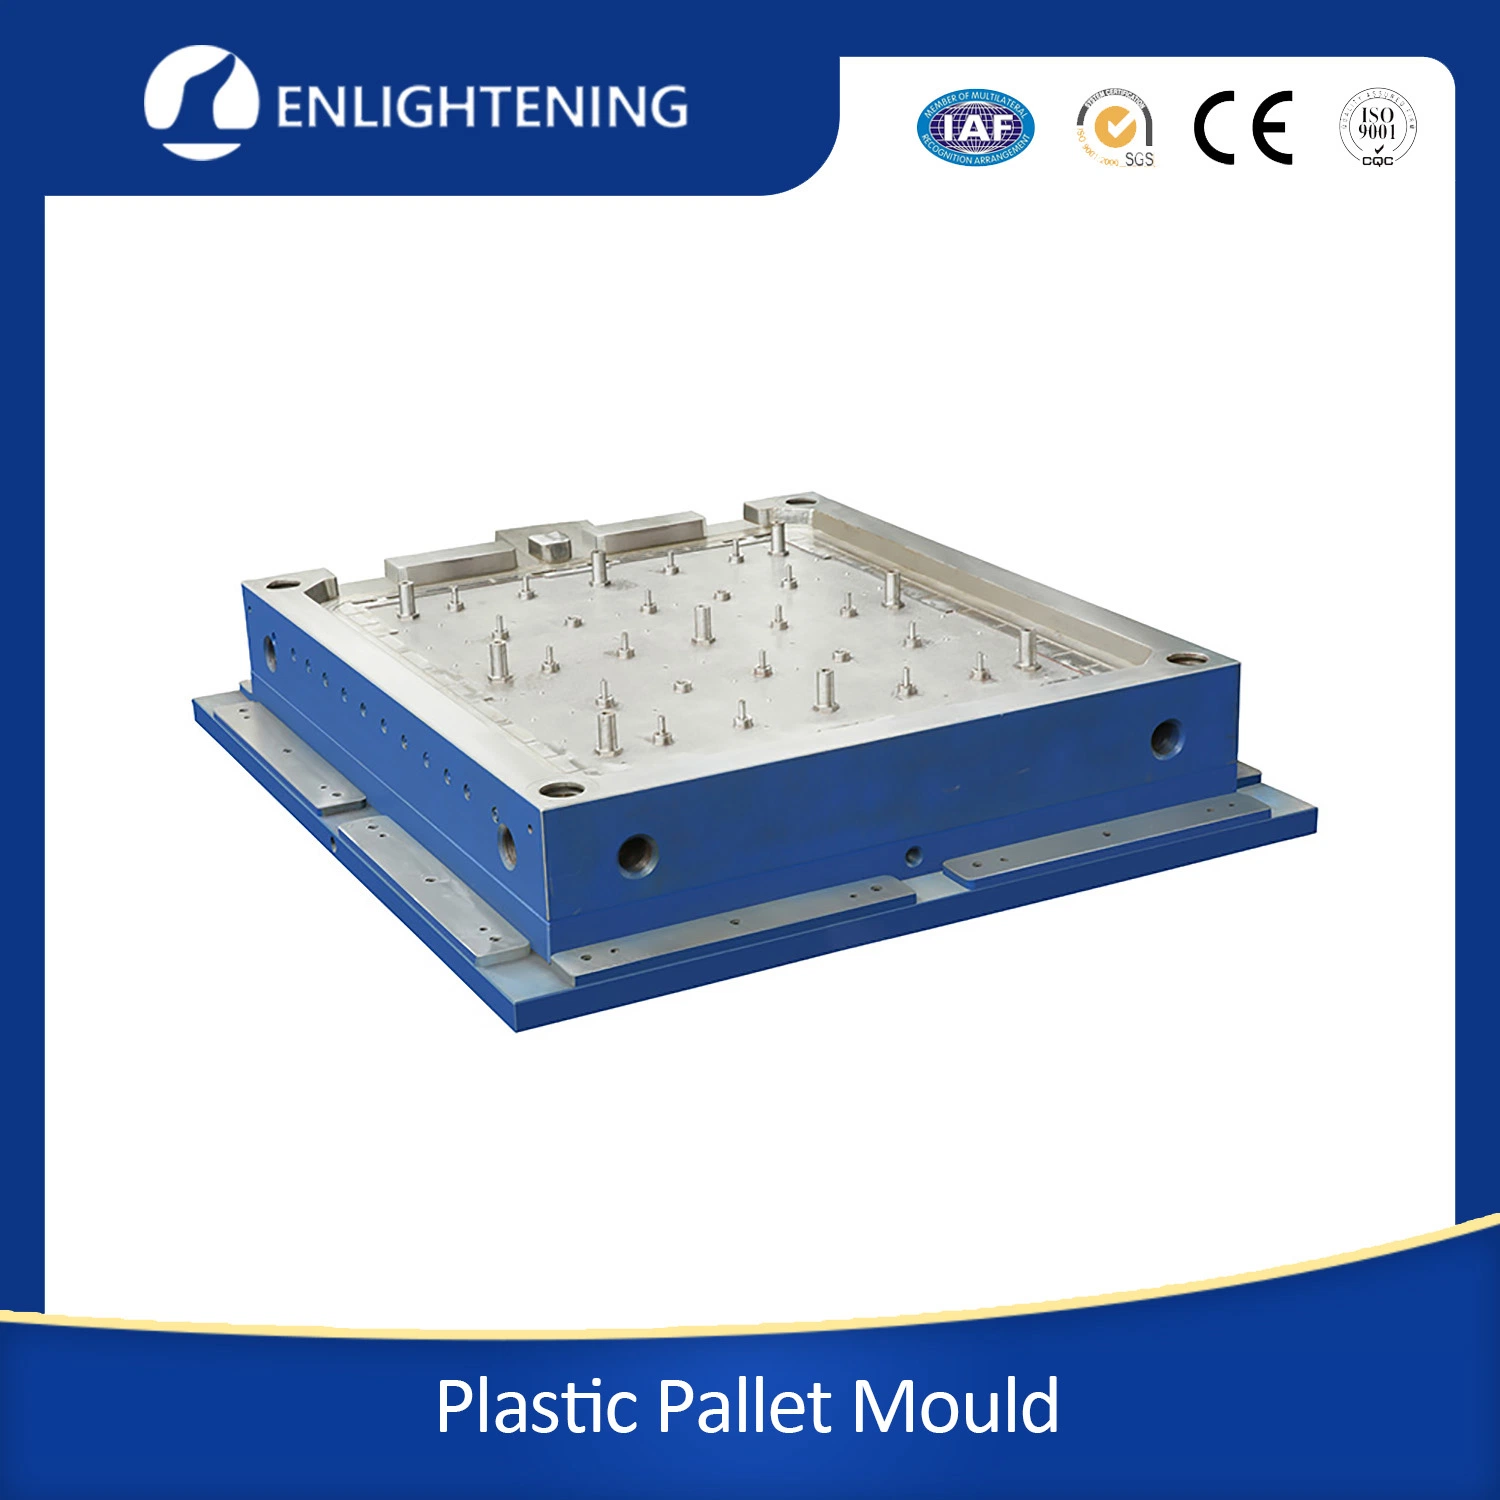 100*80*14cm China Industrial Mould Supplier Plastic Pallet Mould for Plastic 1400 Grid Surface 9 Legs Pallet Injection Mould Making